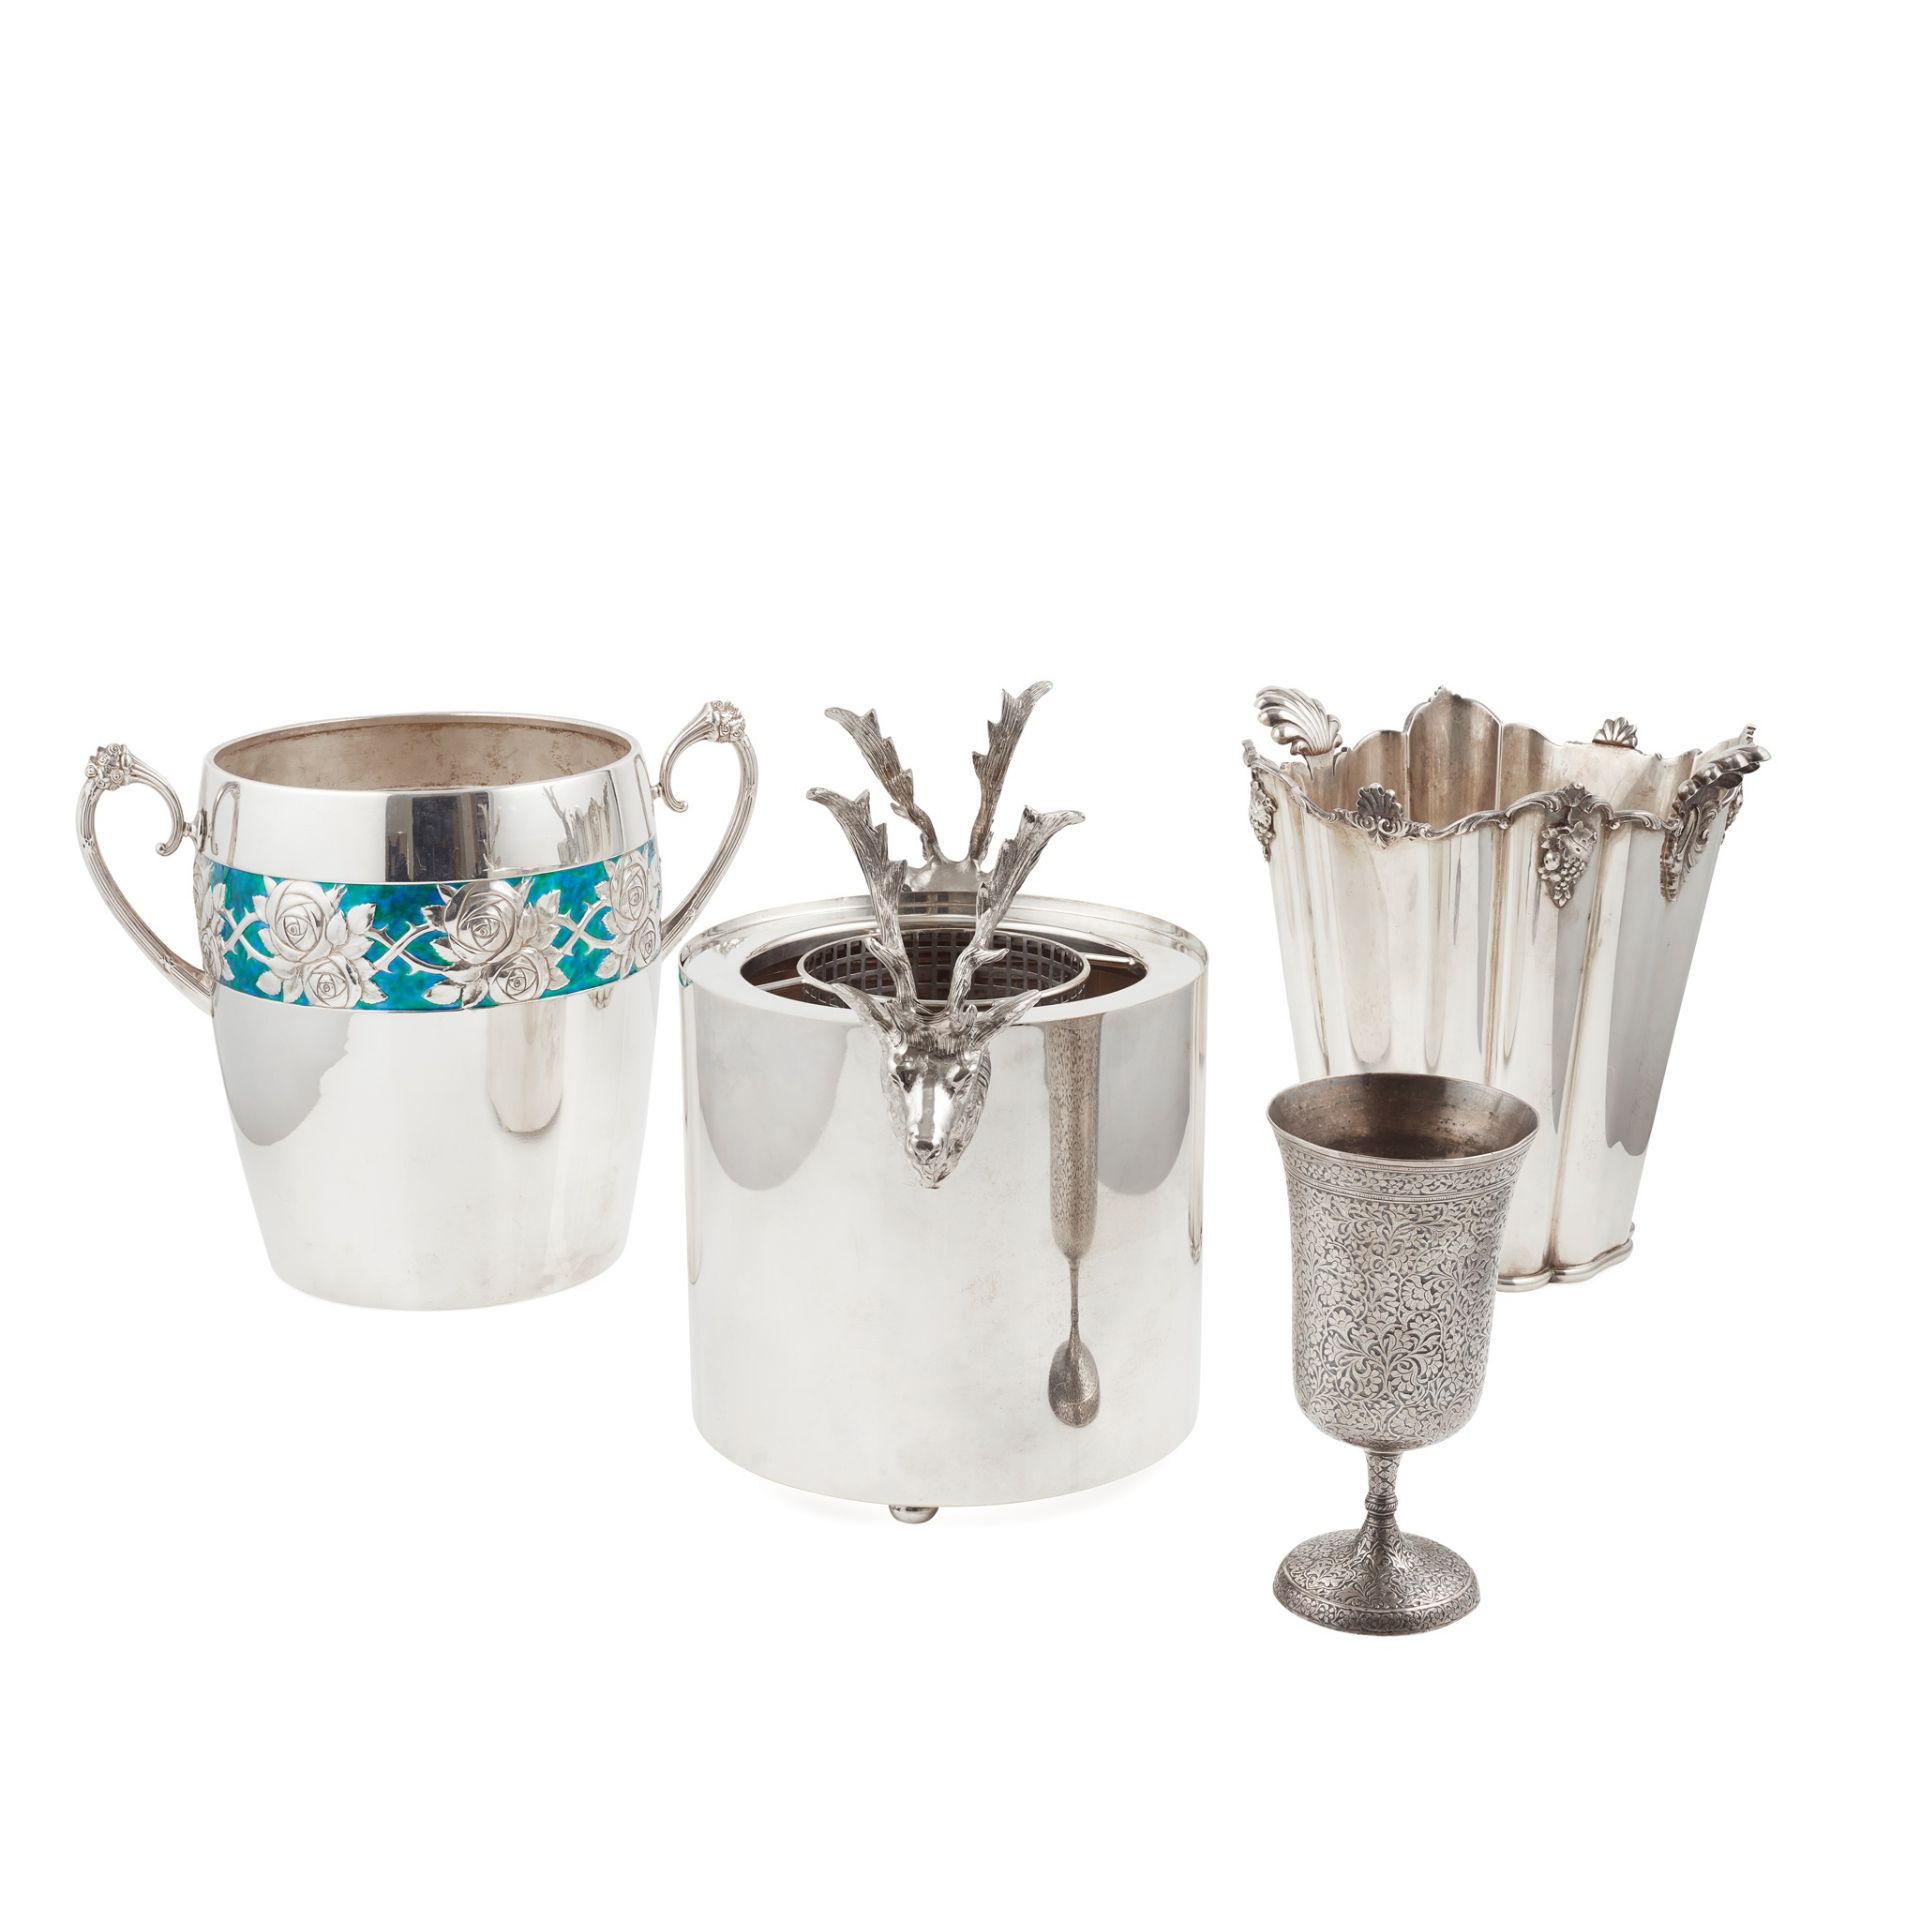 A twin handled silver plated and enamel ice bucket